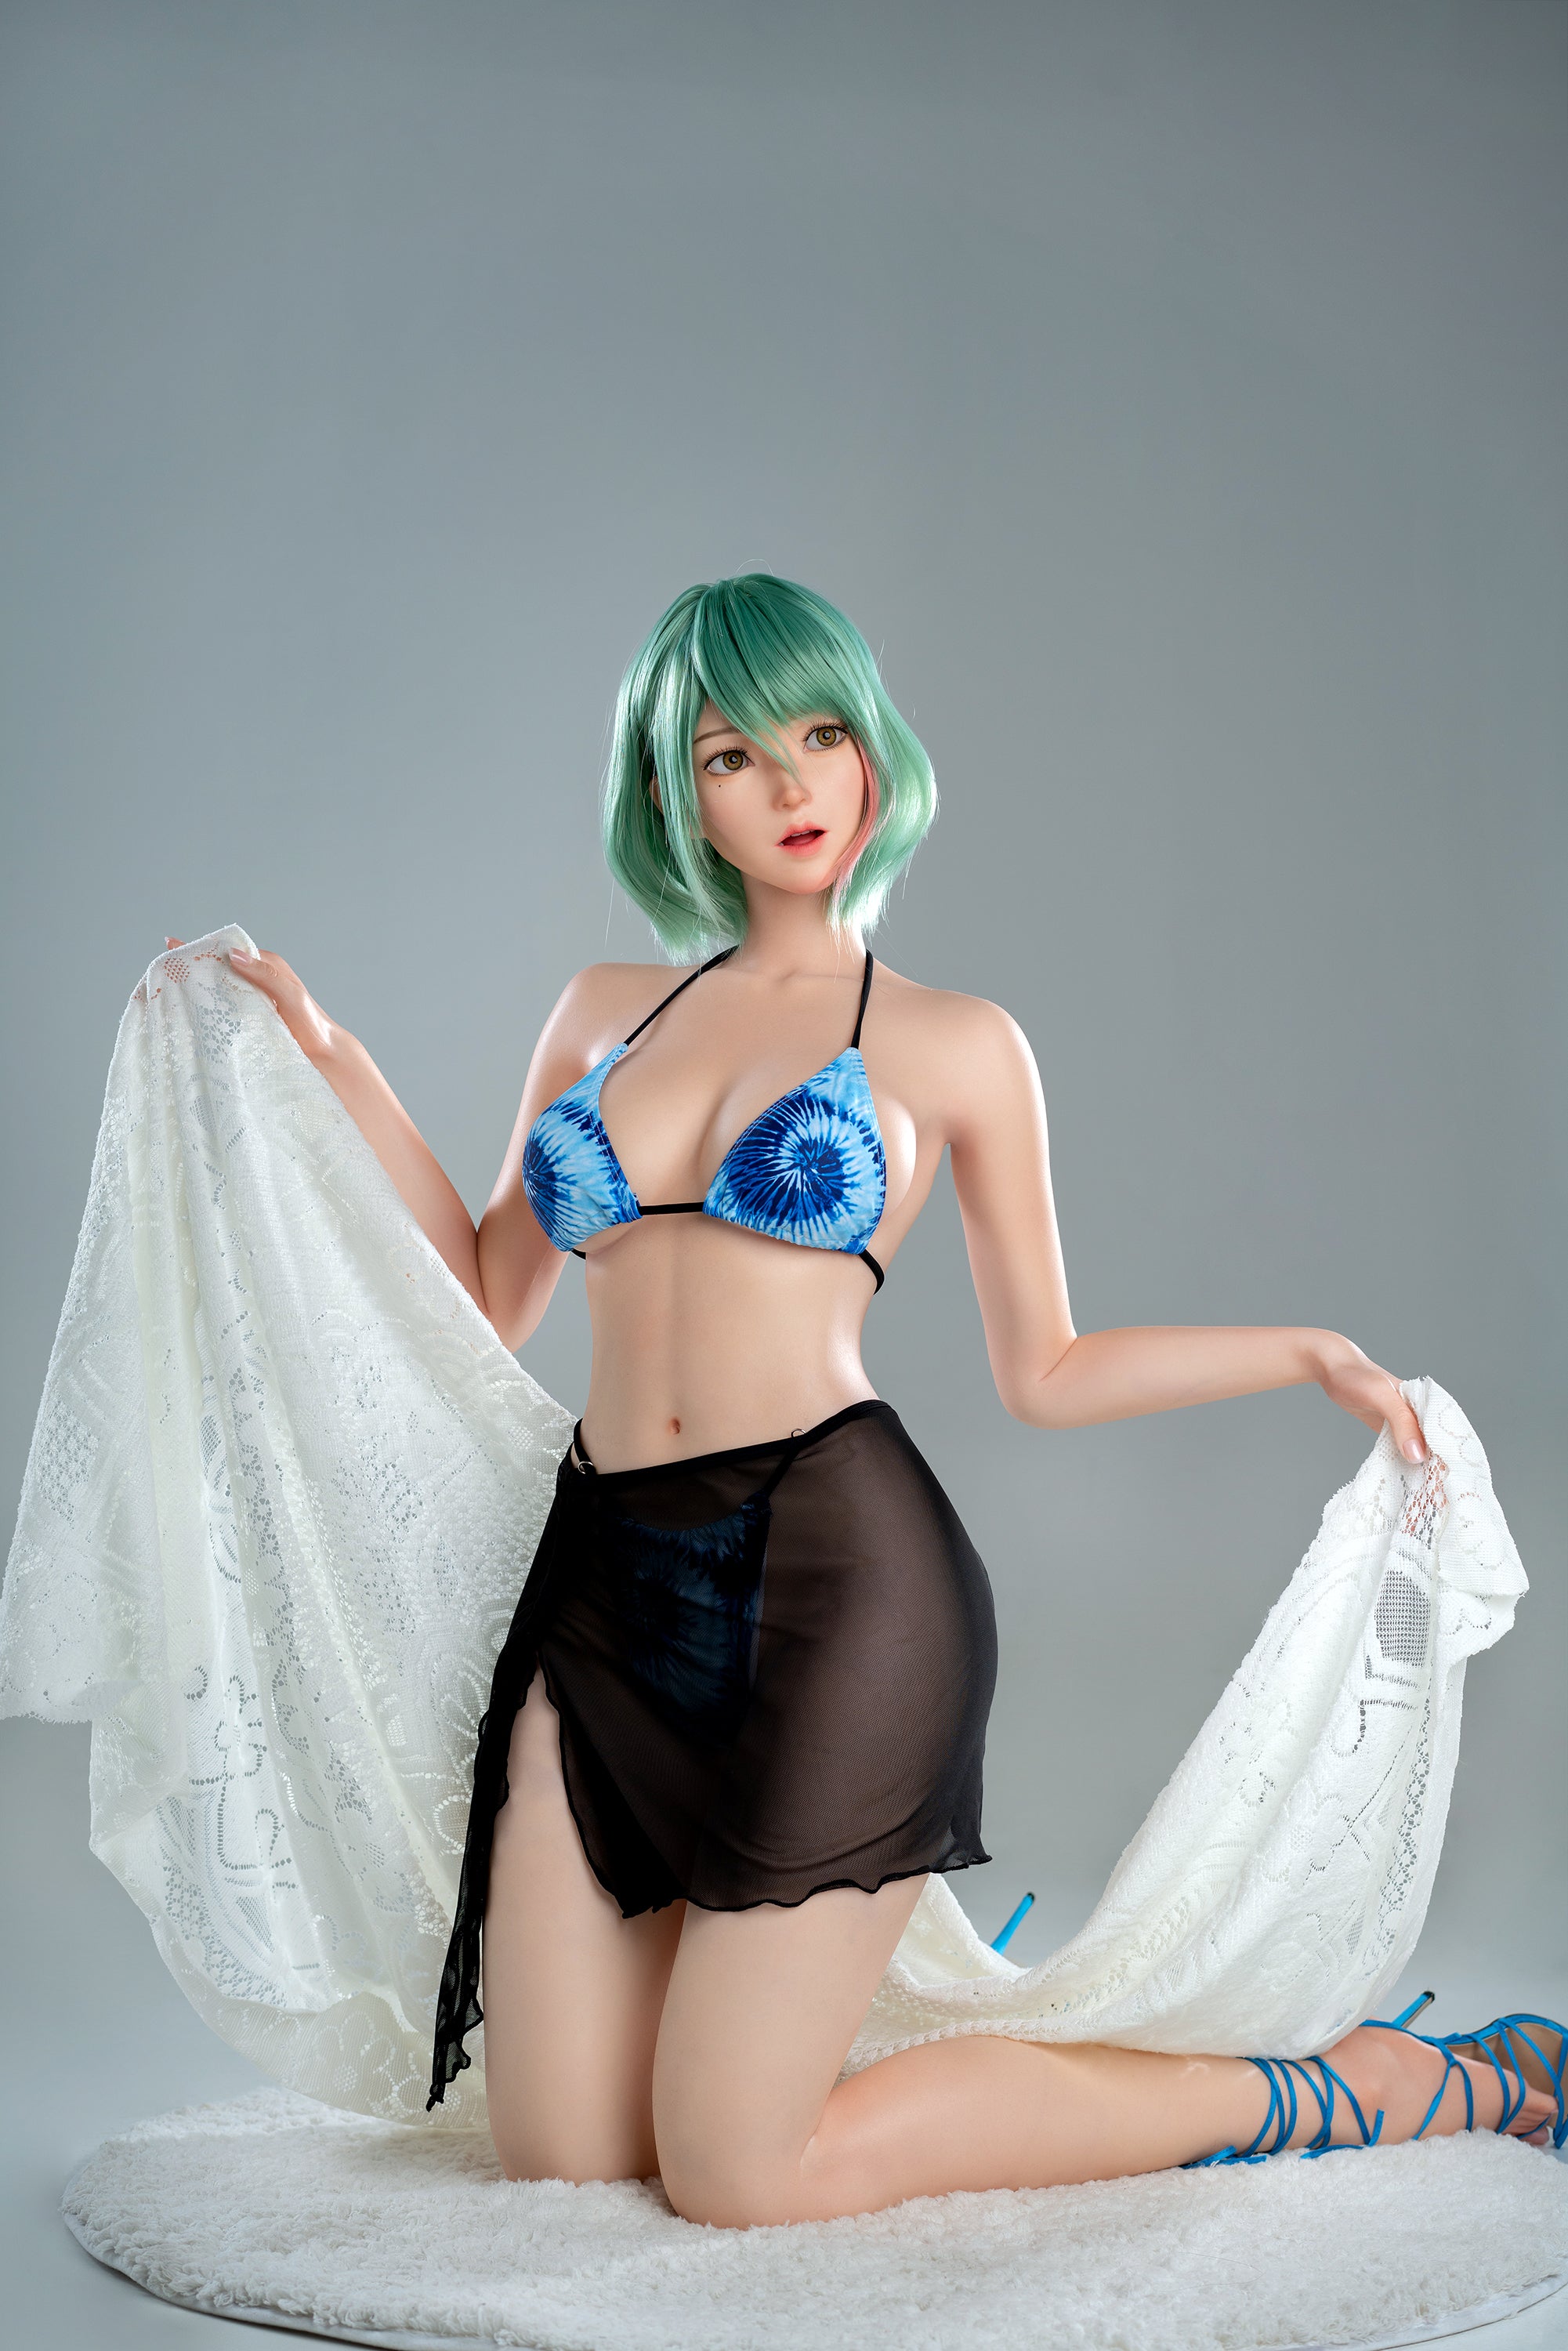 Zelex Doll Inspiration 170 cm C Silicone - Miko (CN) | Buy Sex Dolls at DOLLS ACTUALLY